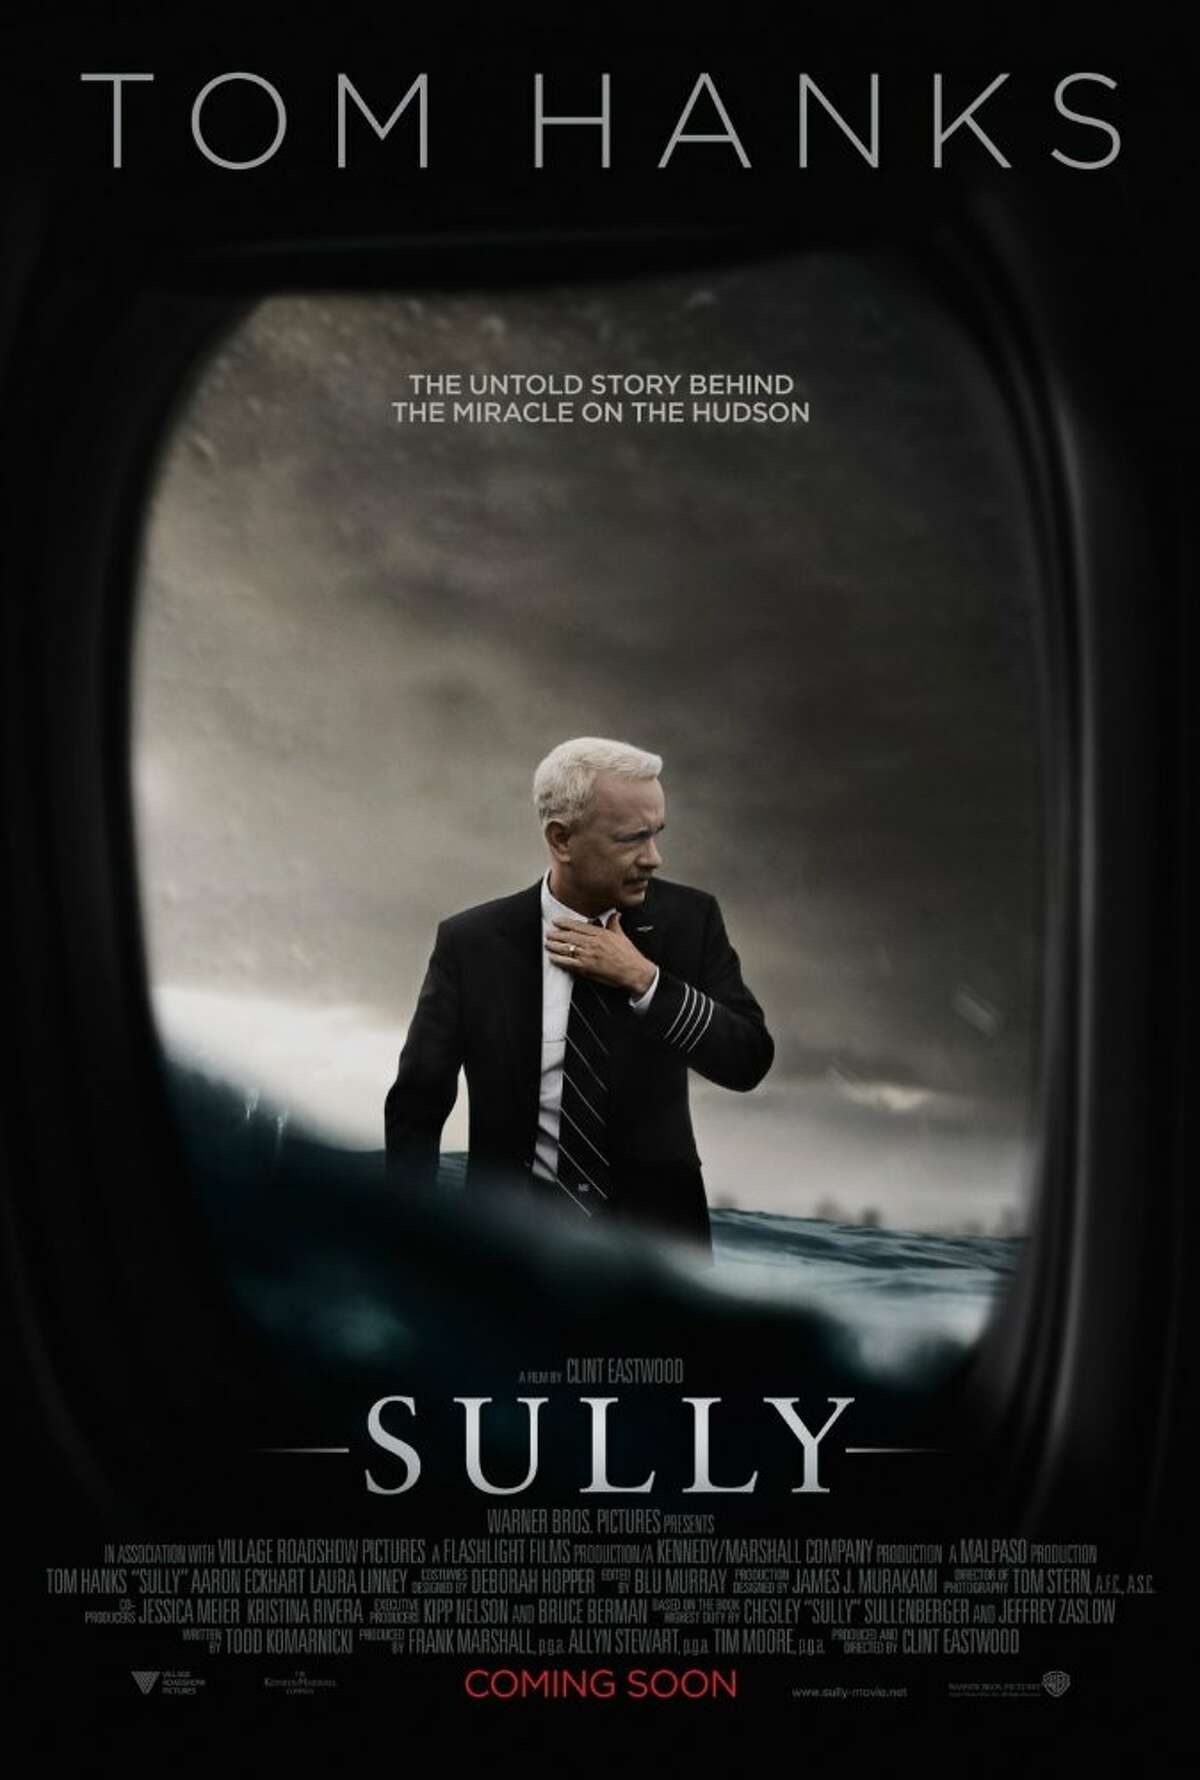 "Sully" is the upcoming film starring Tom Hanks and directed by Clint Eastwood.